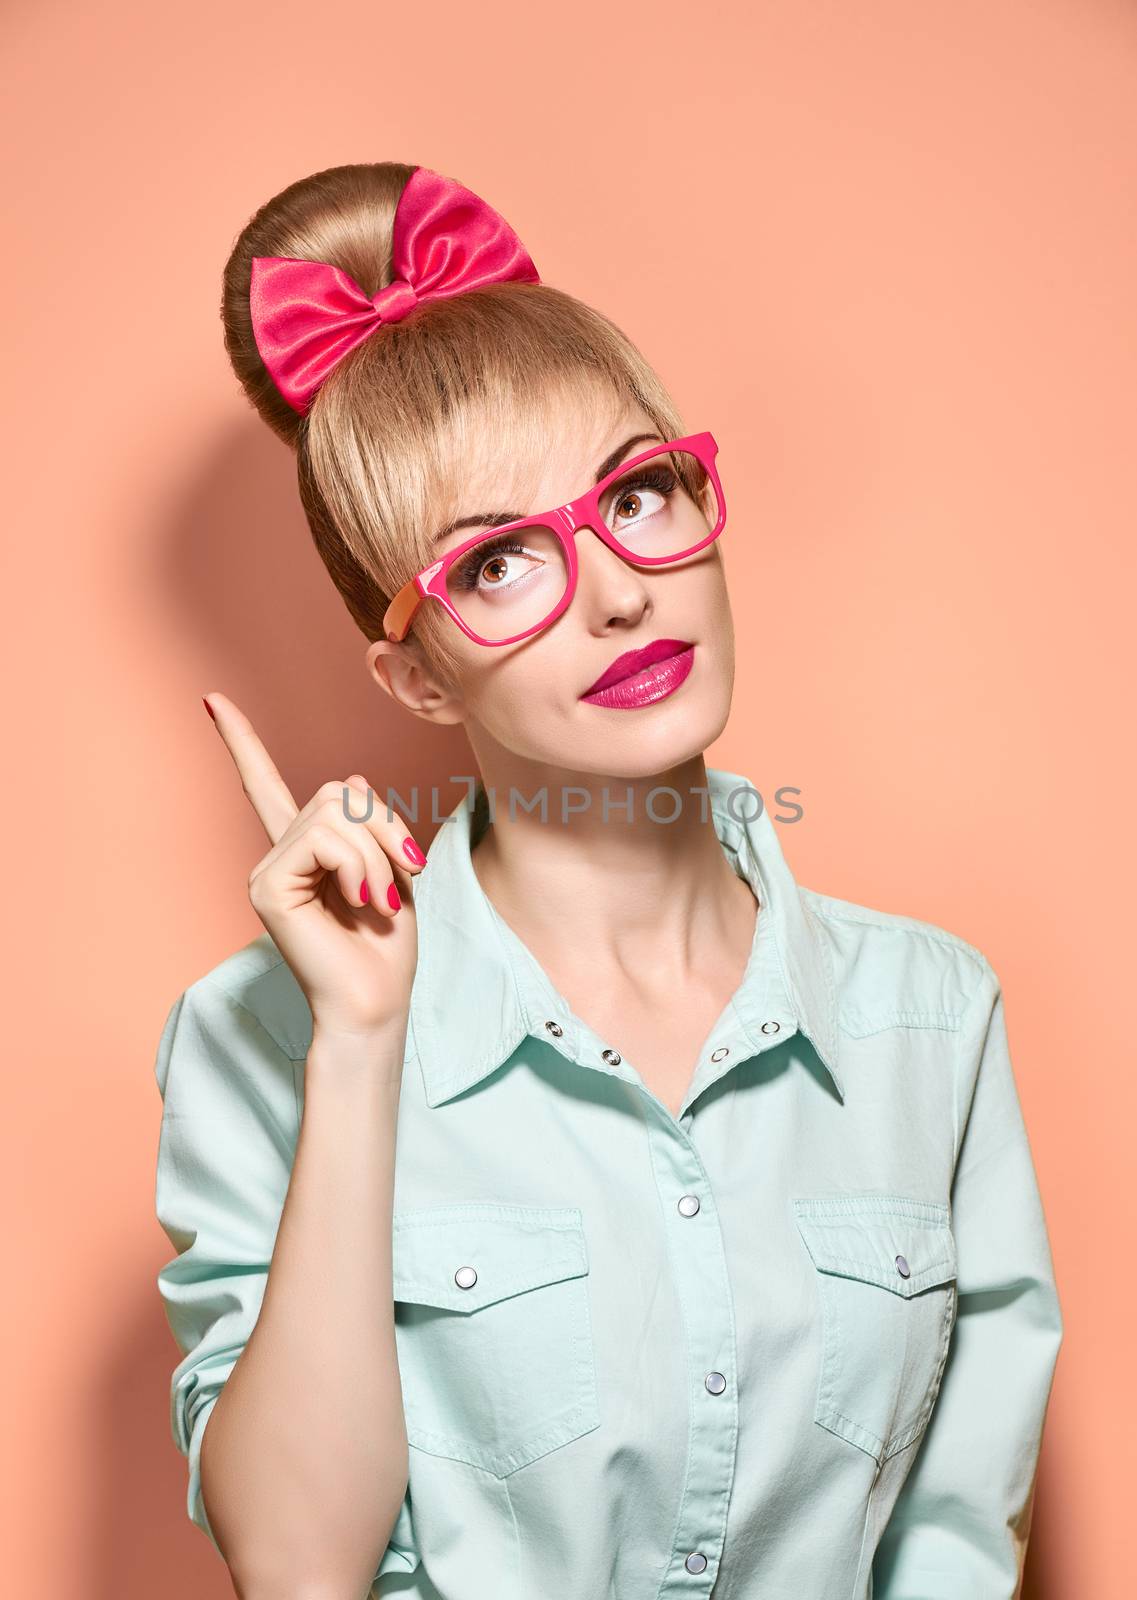 Beauty fashion hipster woman in stylish glasses thinking, idea. Attractive pretty funny blonde girl smiling. Confidence, success, Pinup hairstyle bow makeup. Unusual playful, expression.Vintage, pink